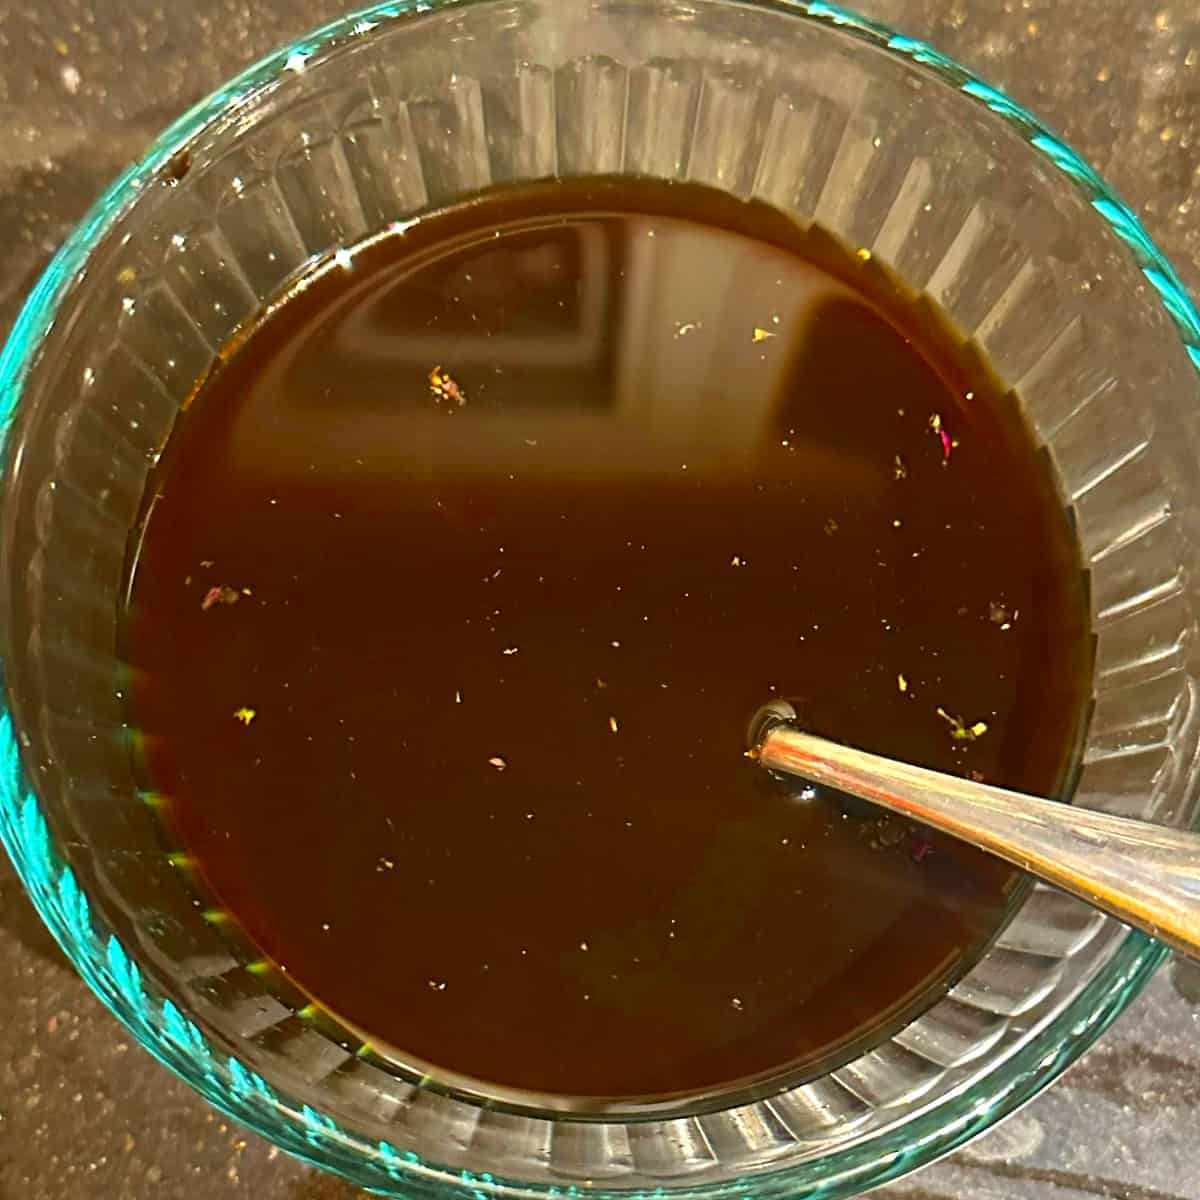 Vegetable stock mixed with soy sauce, sriracha and other sauce ingredients.